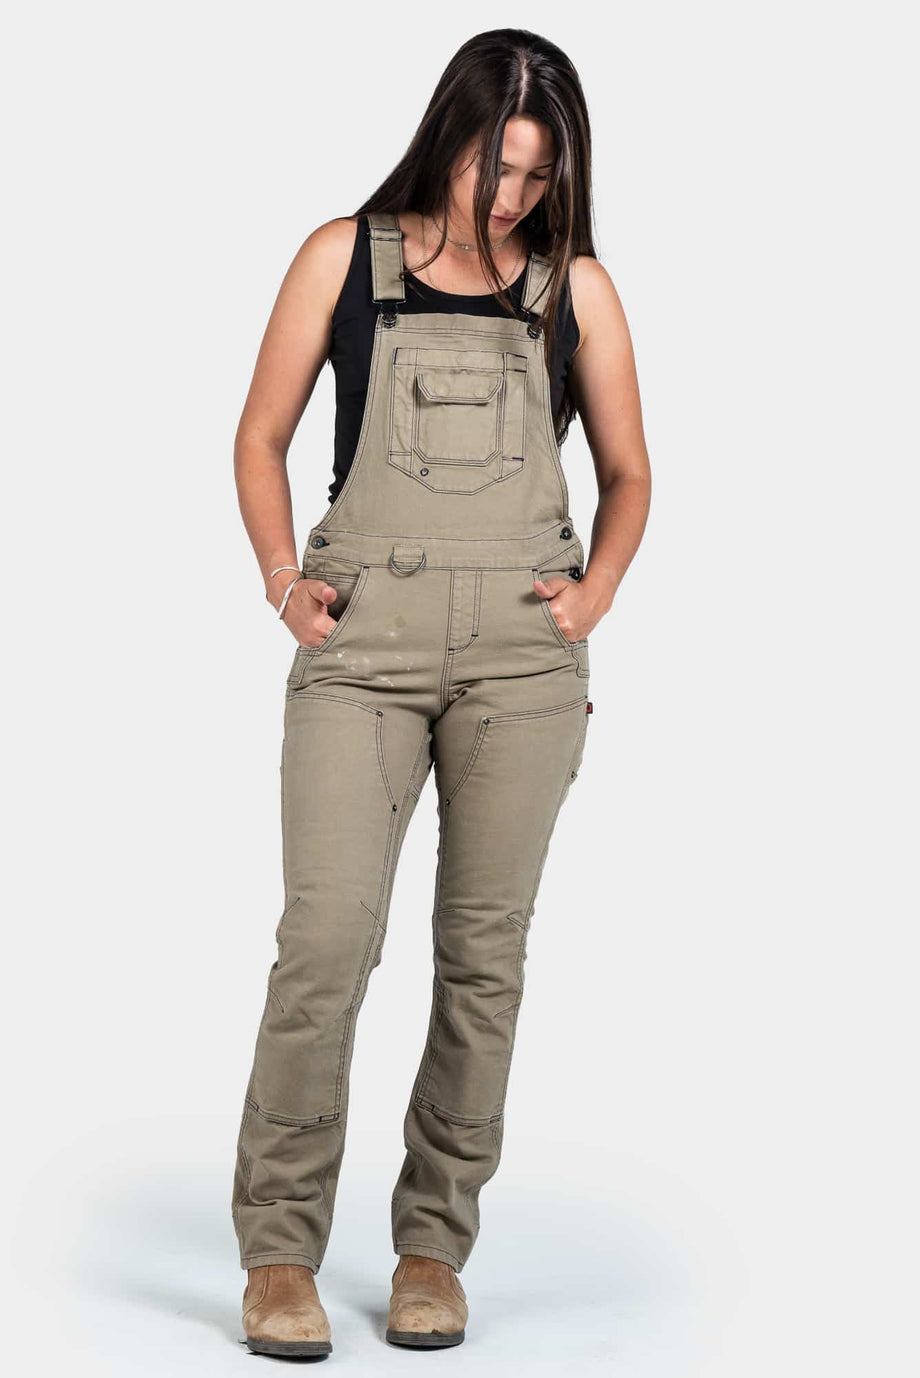 Dovetail Limited Edition Freshley Overalls Natural Canvas